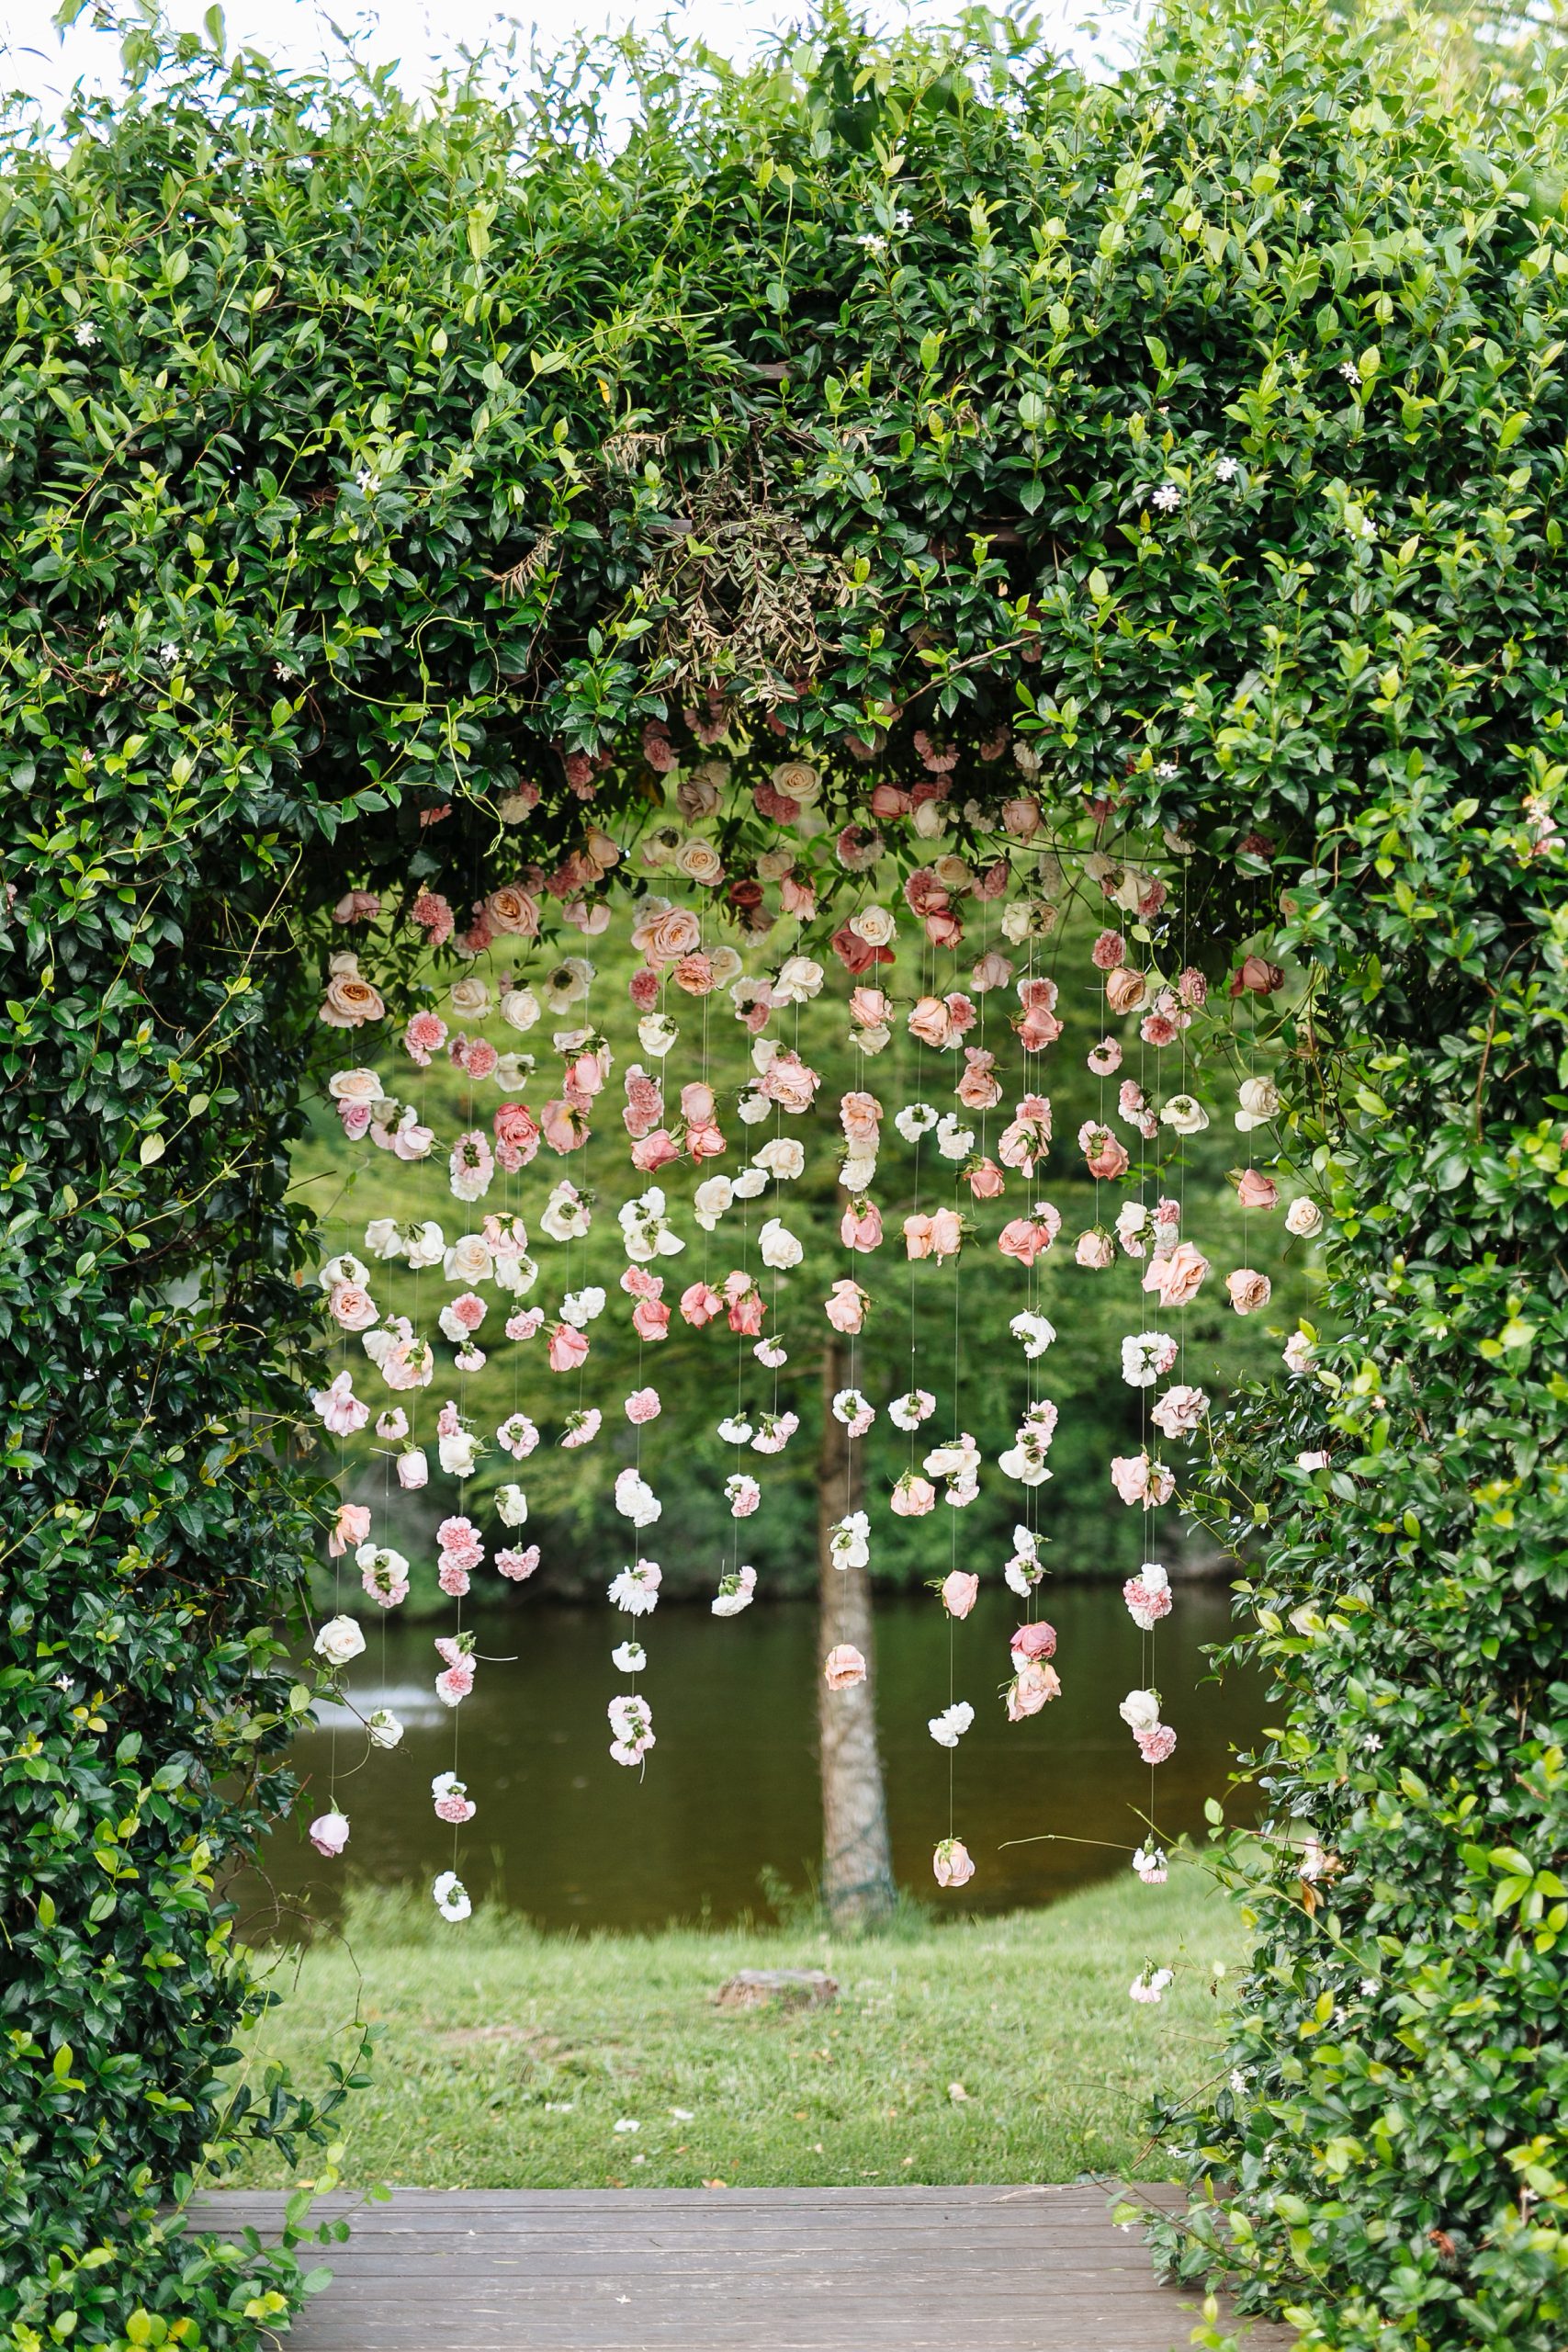 Summer Wedding Decorations With Pinks Roses